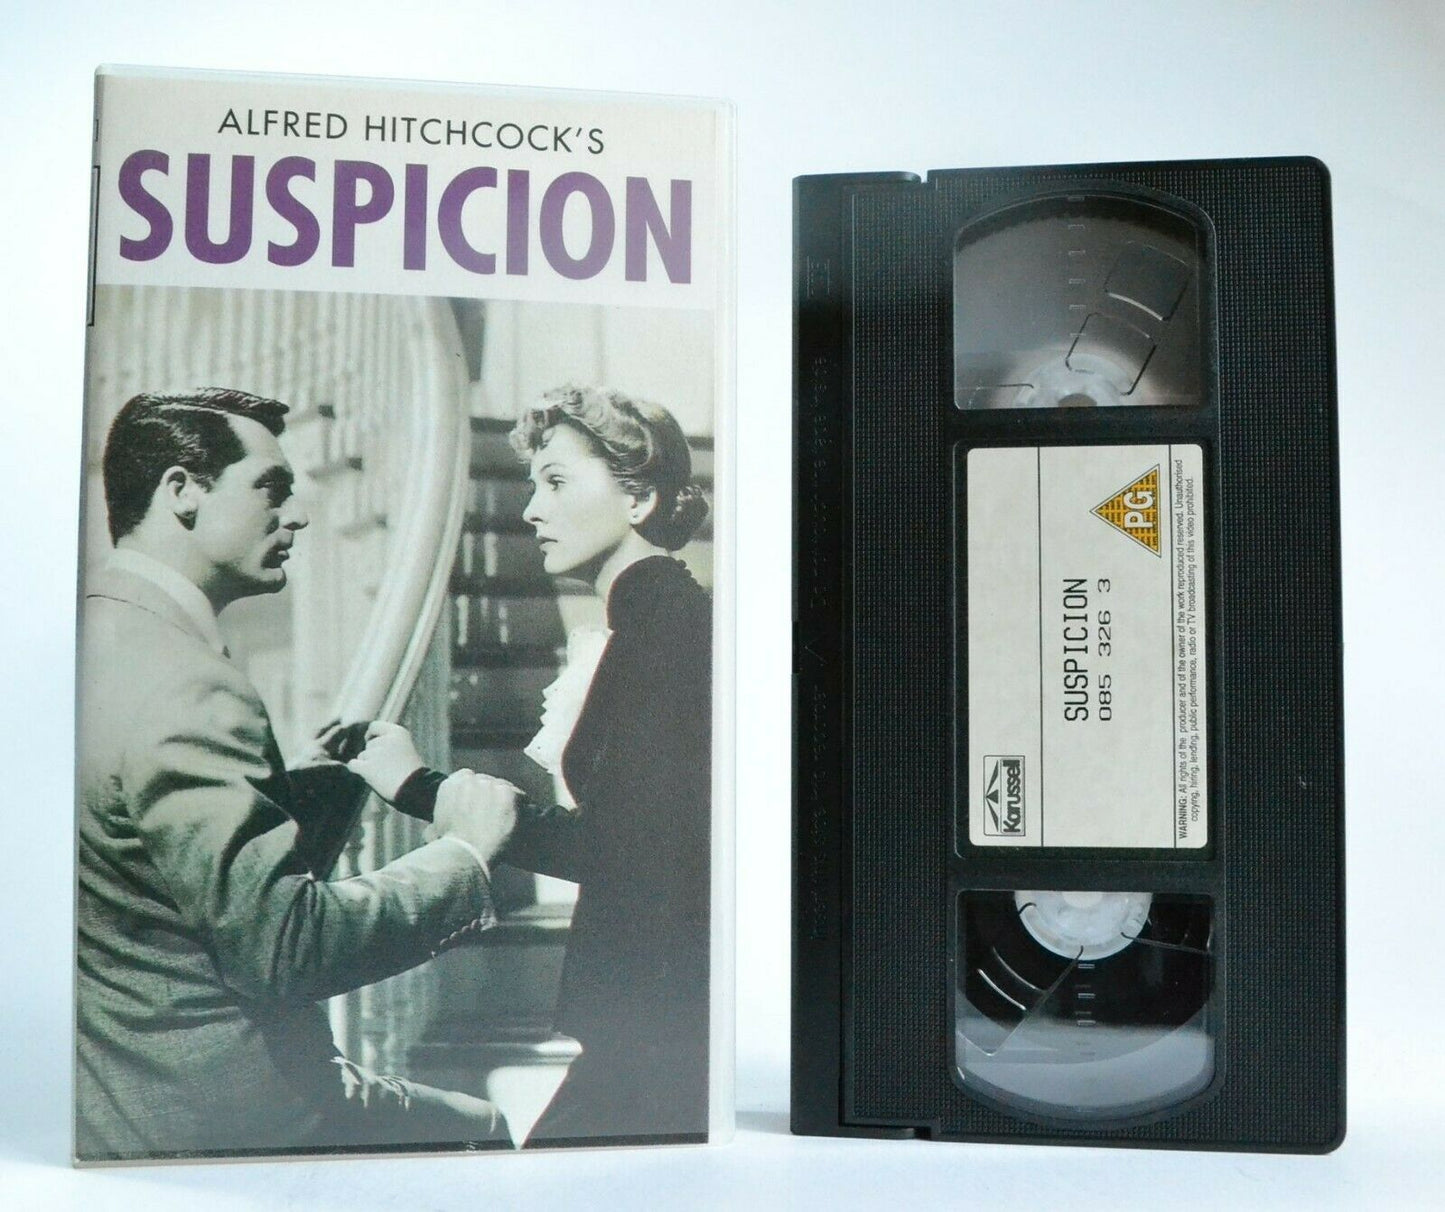 Suspicion (1941): An Alfred Hitchcock Thriller - Cary Grant/Joan Fontaine - VHS-